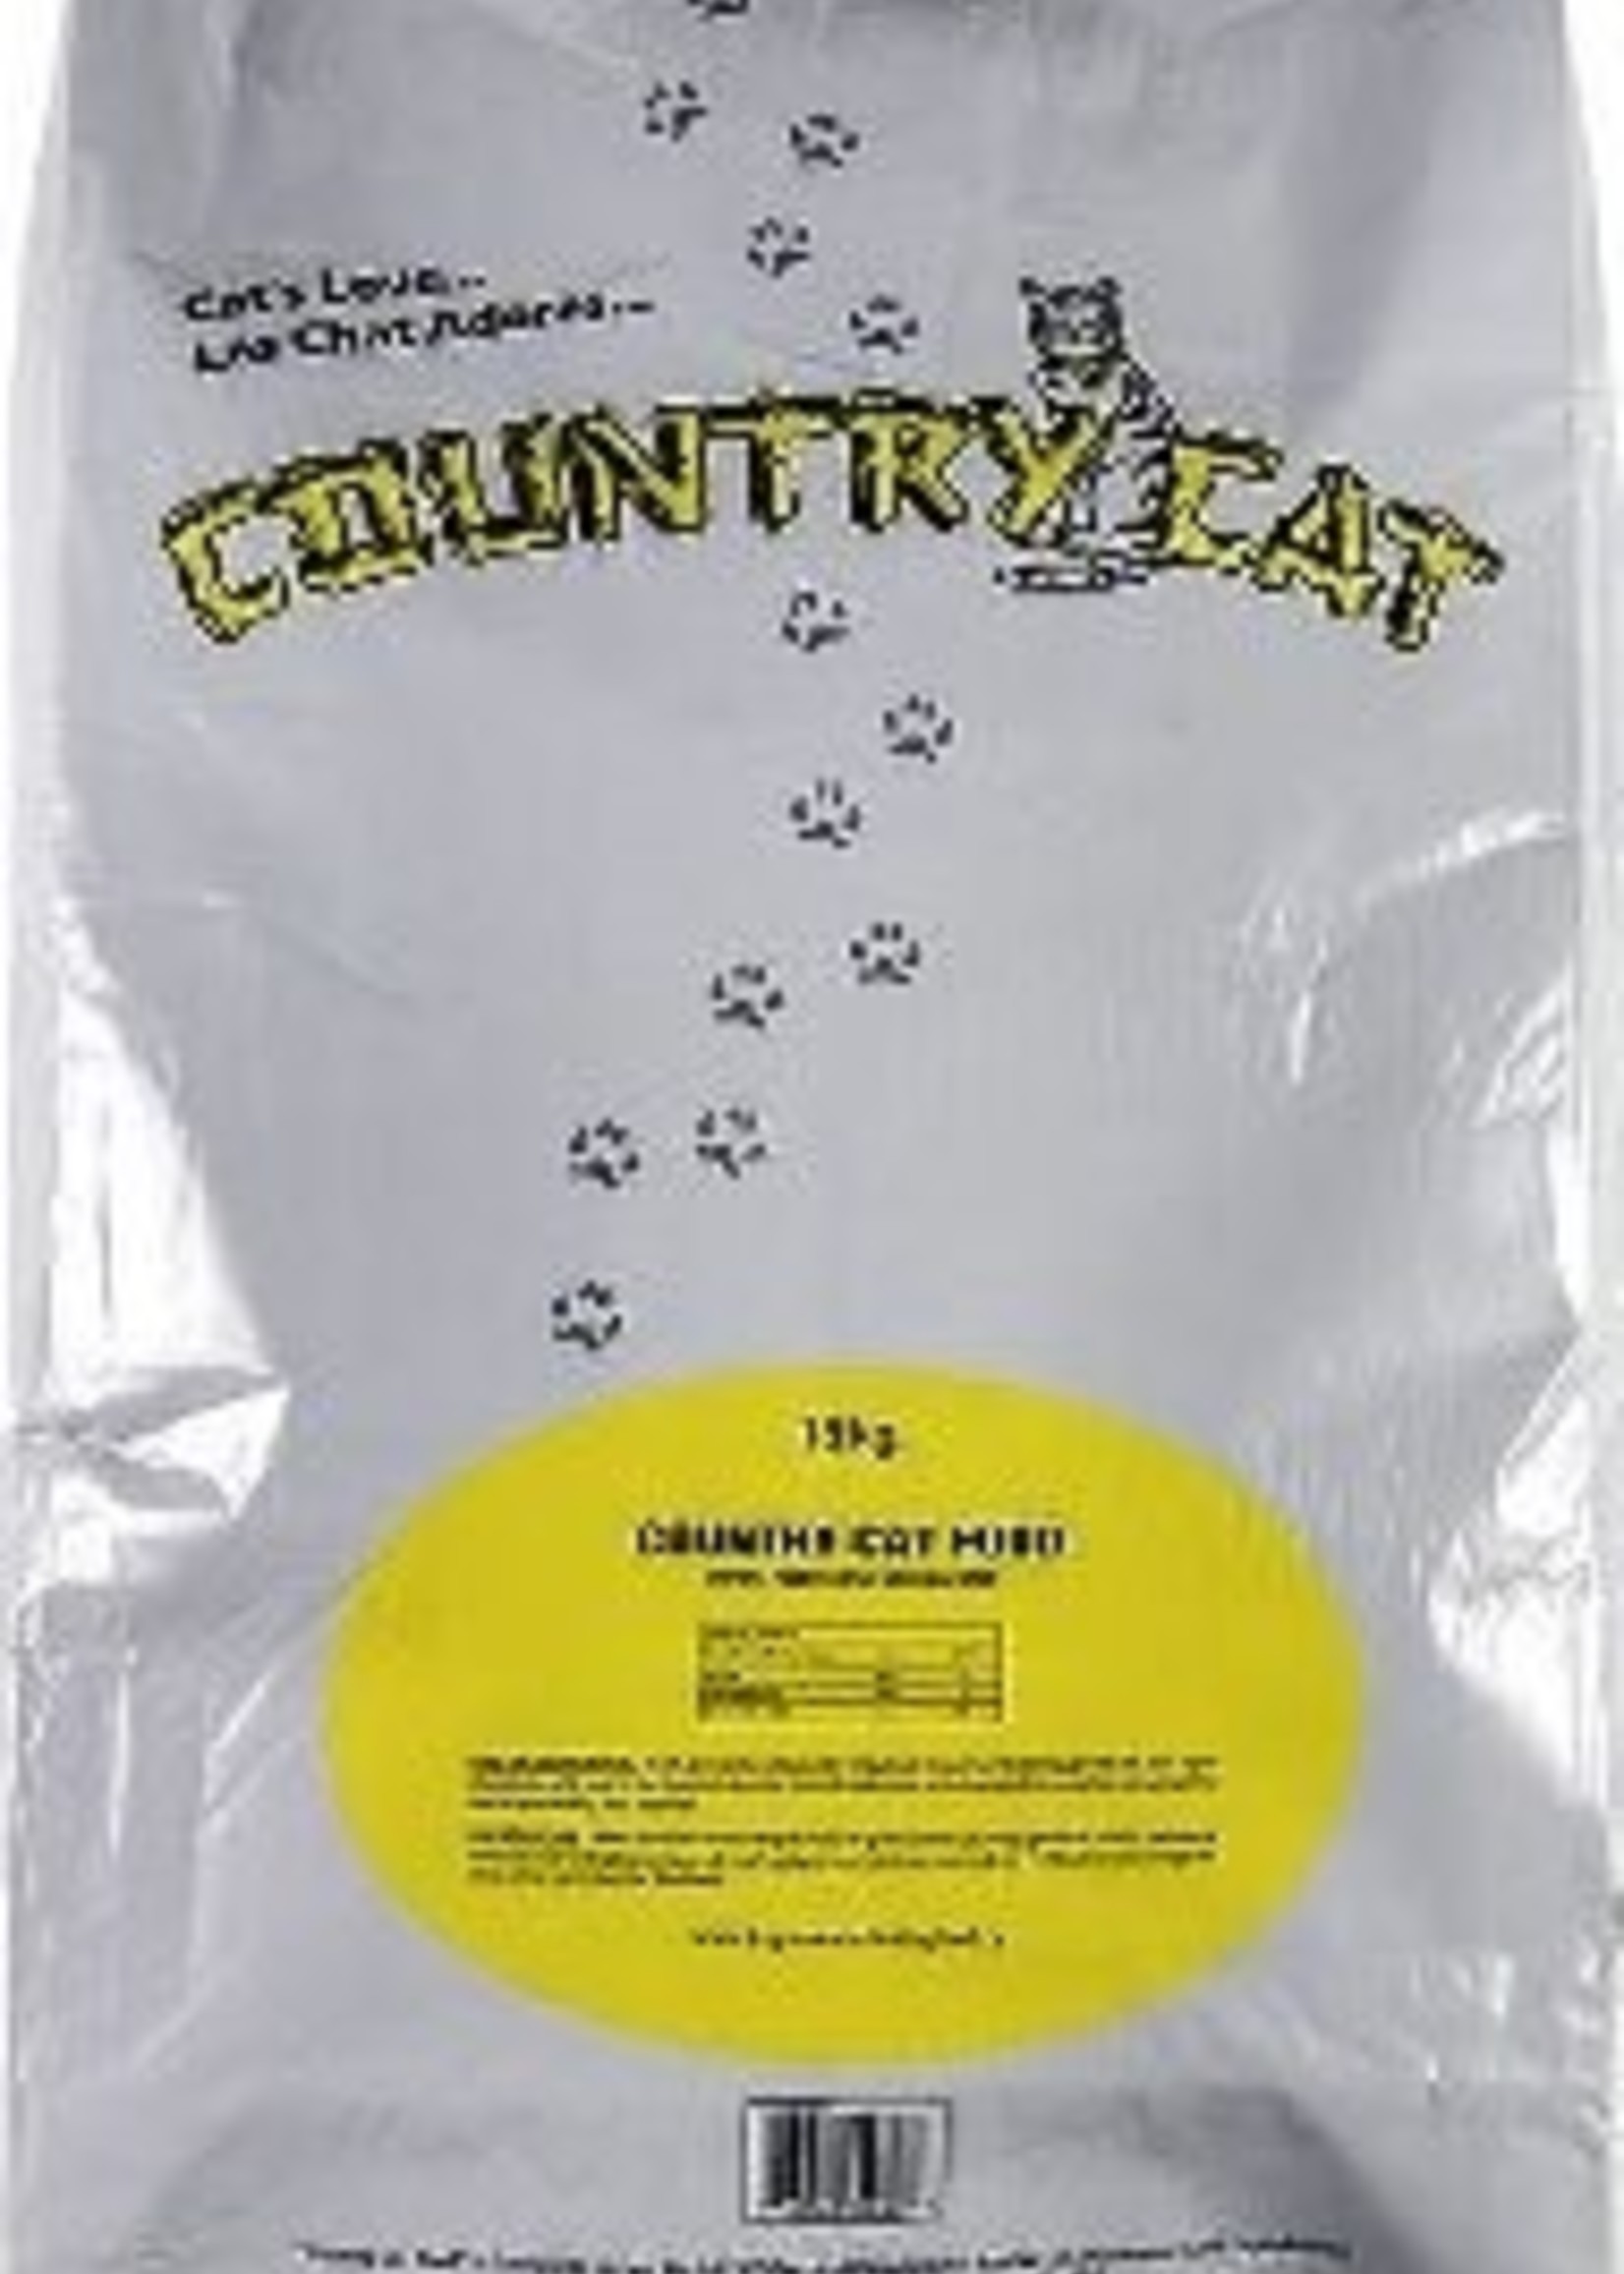 Country Cat Country Cat Food 18kg